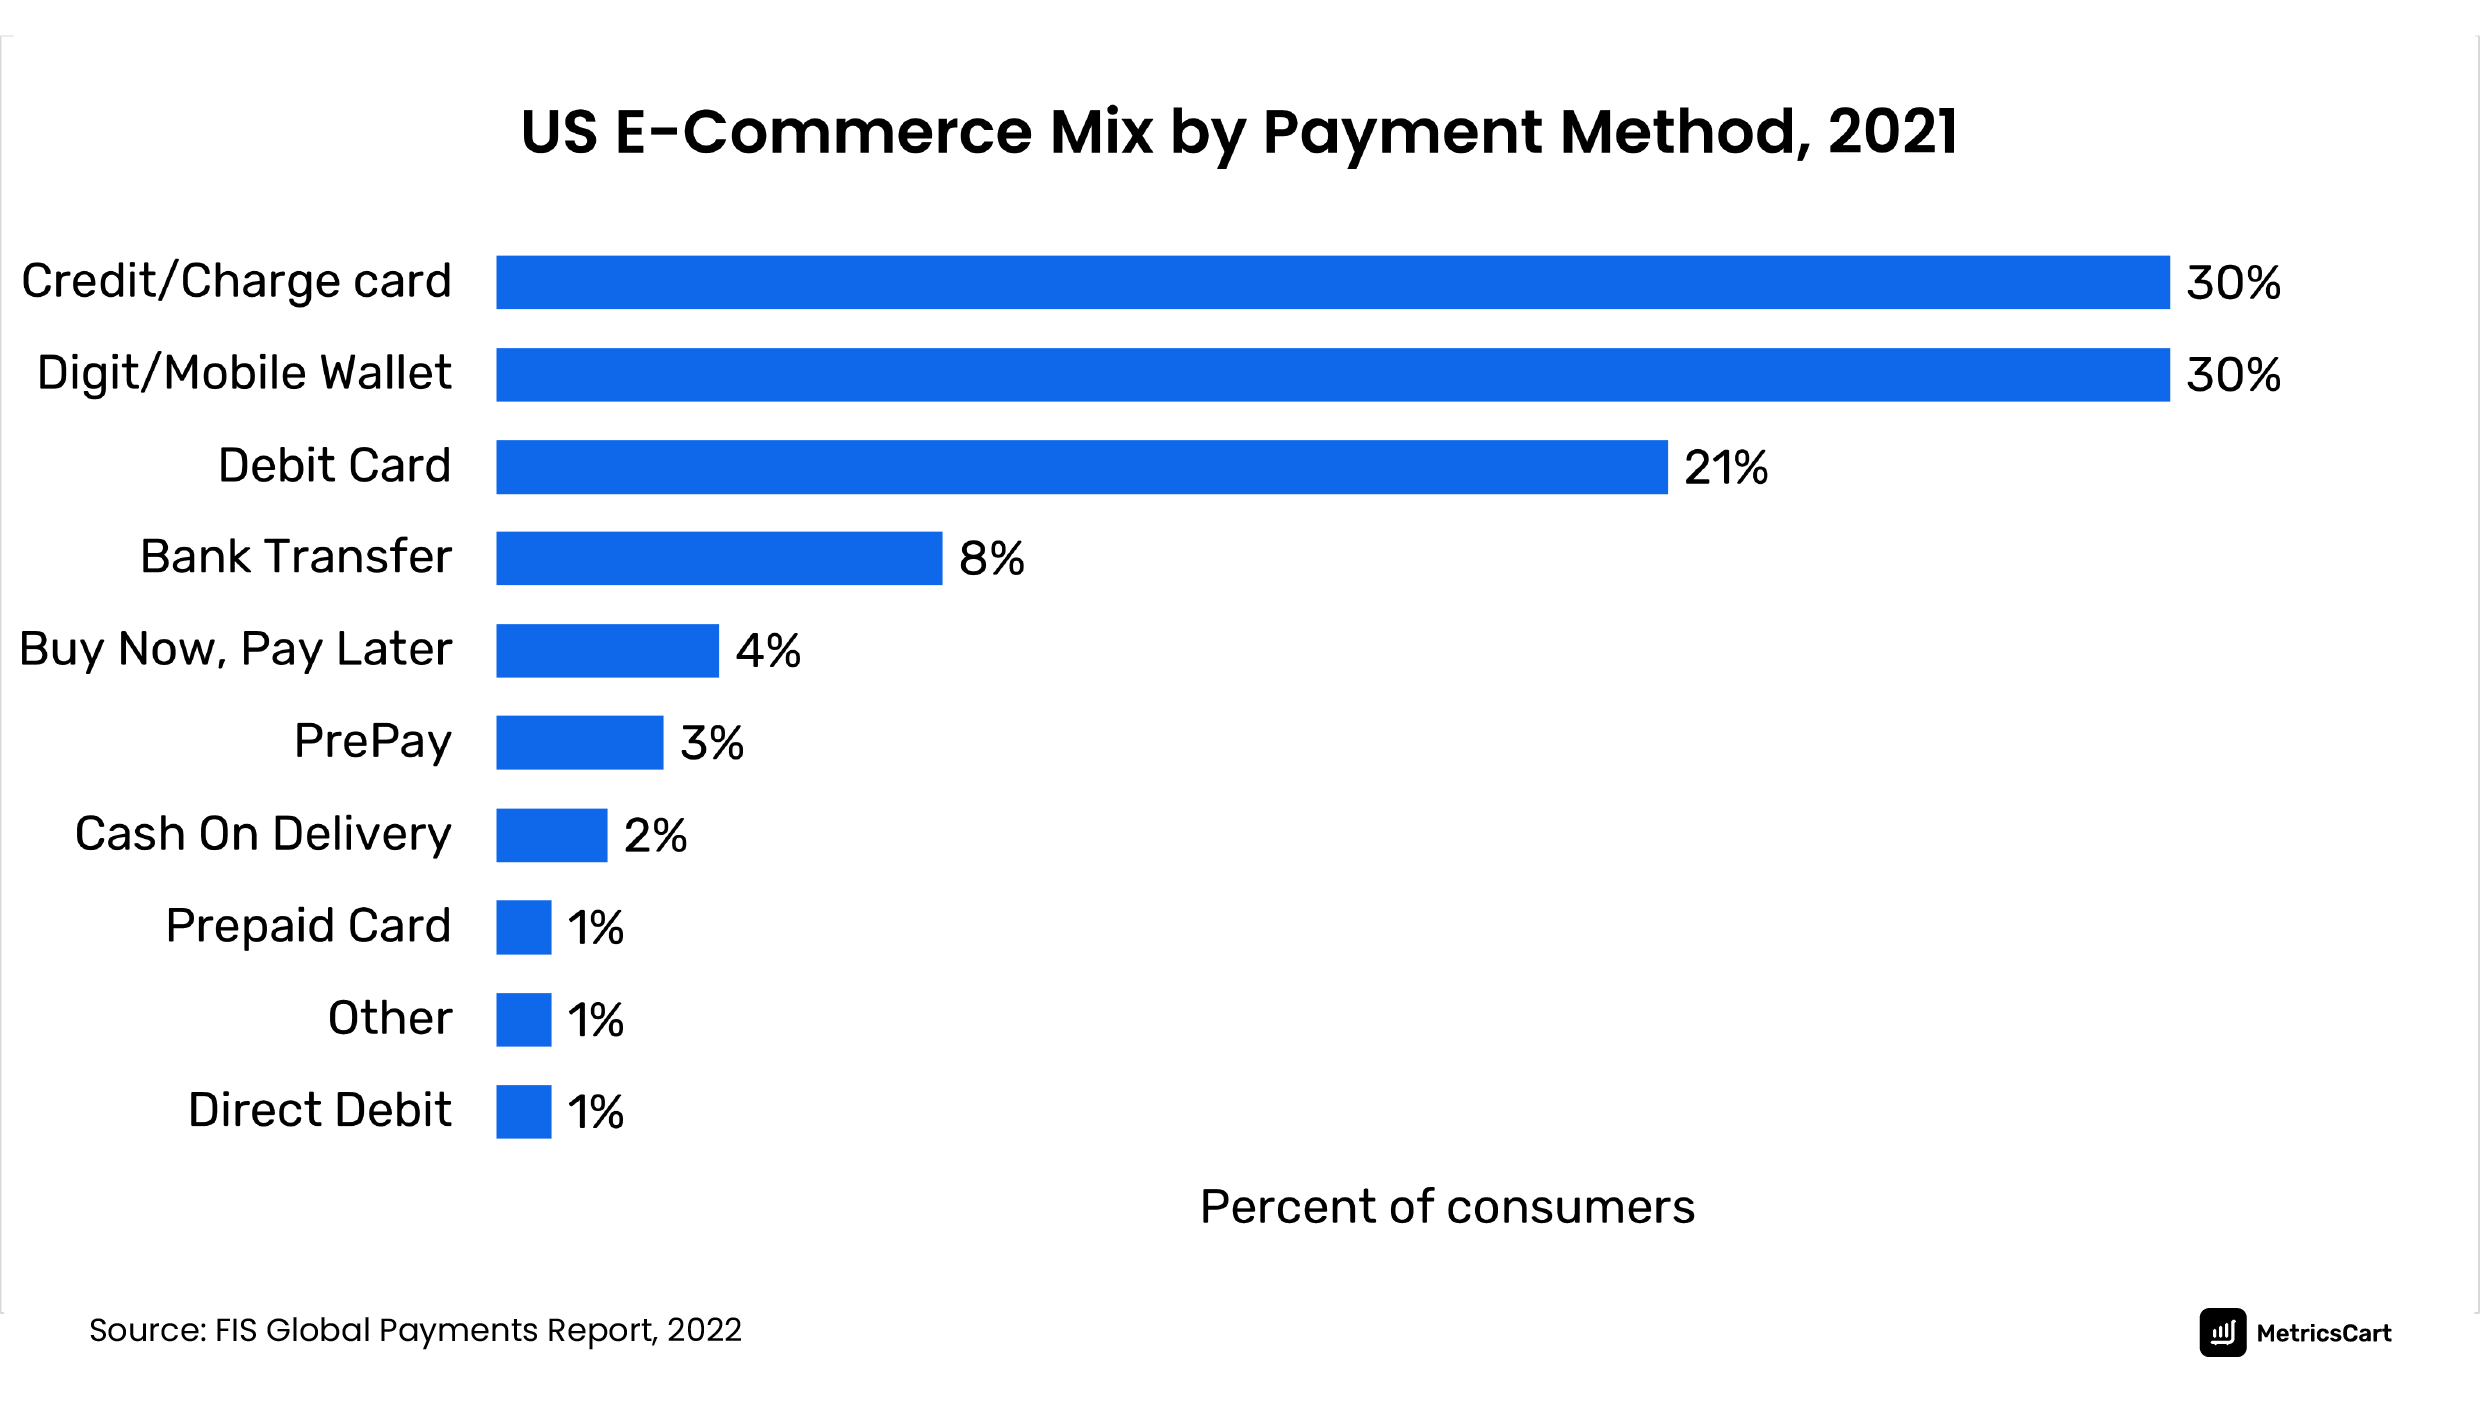 Chart showing US fashion ecommerce mix by payment method